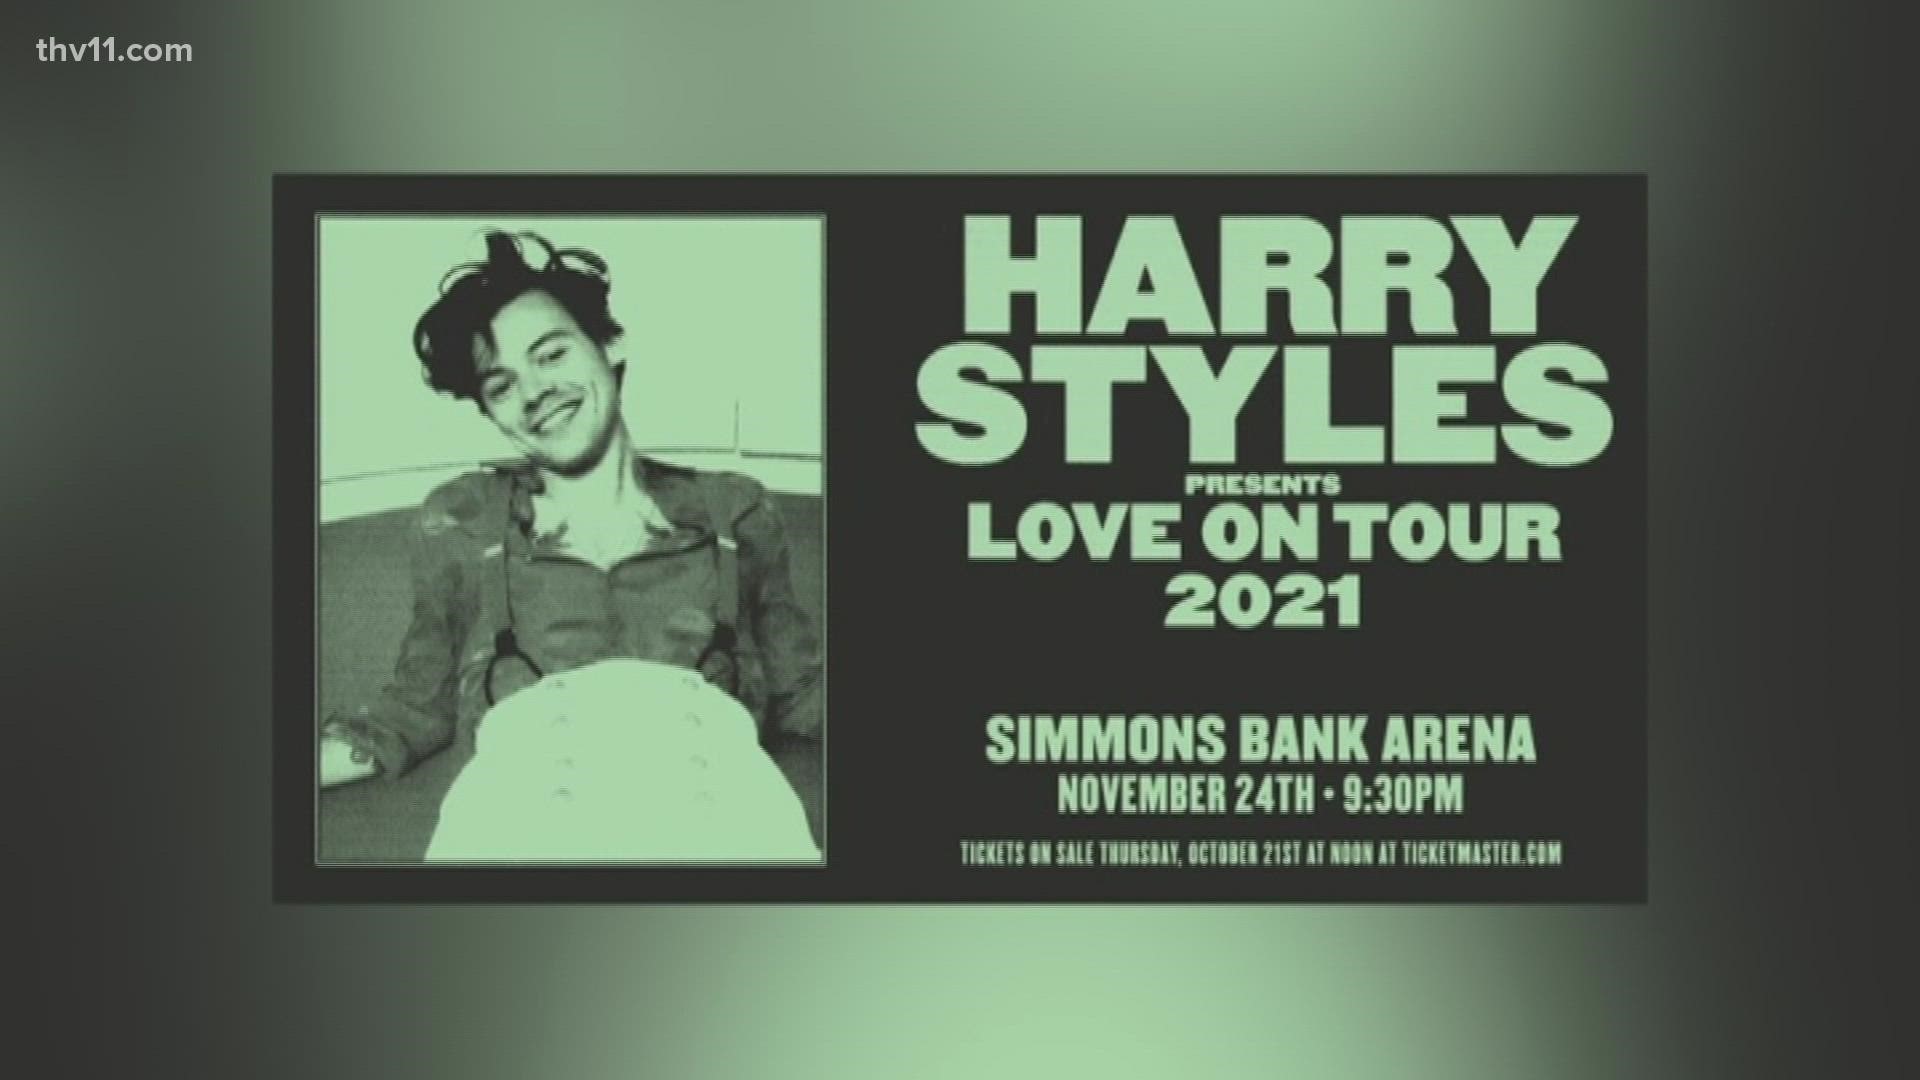 Pop superstar Harry Style is bringing his Love On Tour concert to Simmons Bank Arena in North Little Rock.